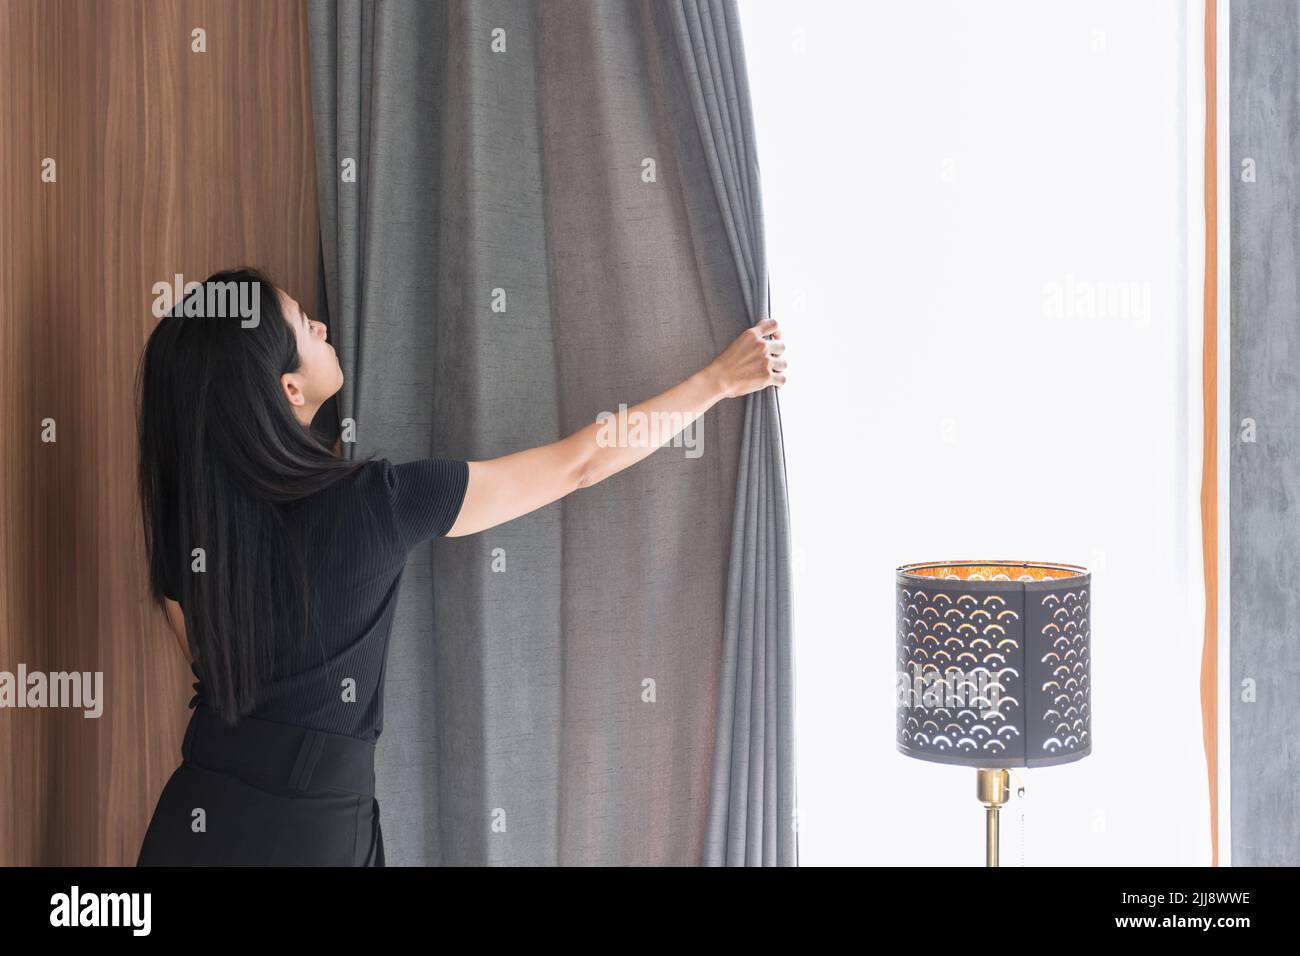 Maid housewife woman working chores housekeeping cleaning room arrange window curtains at home or hotel. Stock Photo